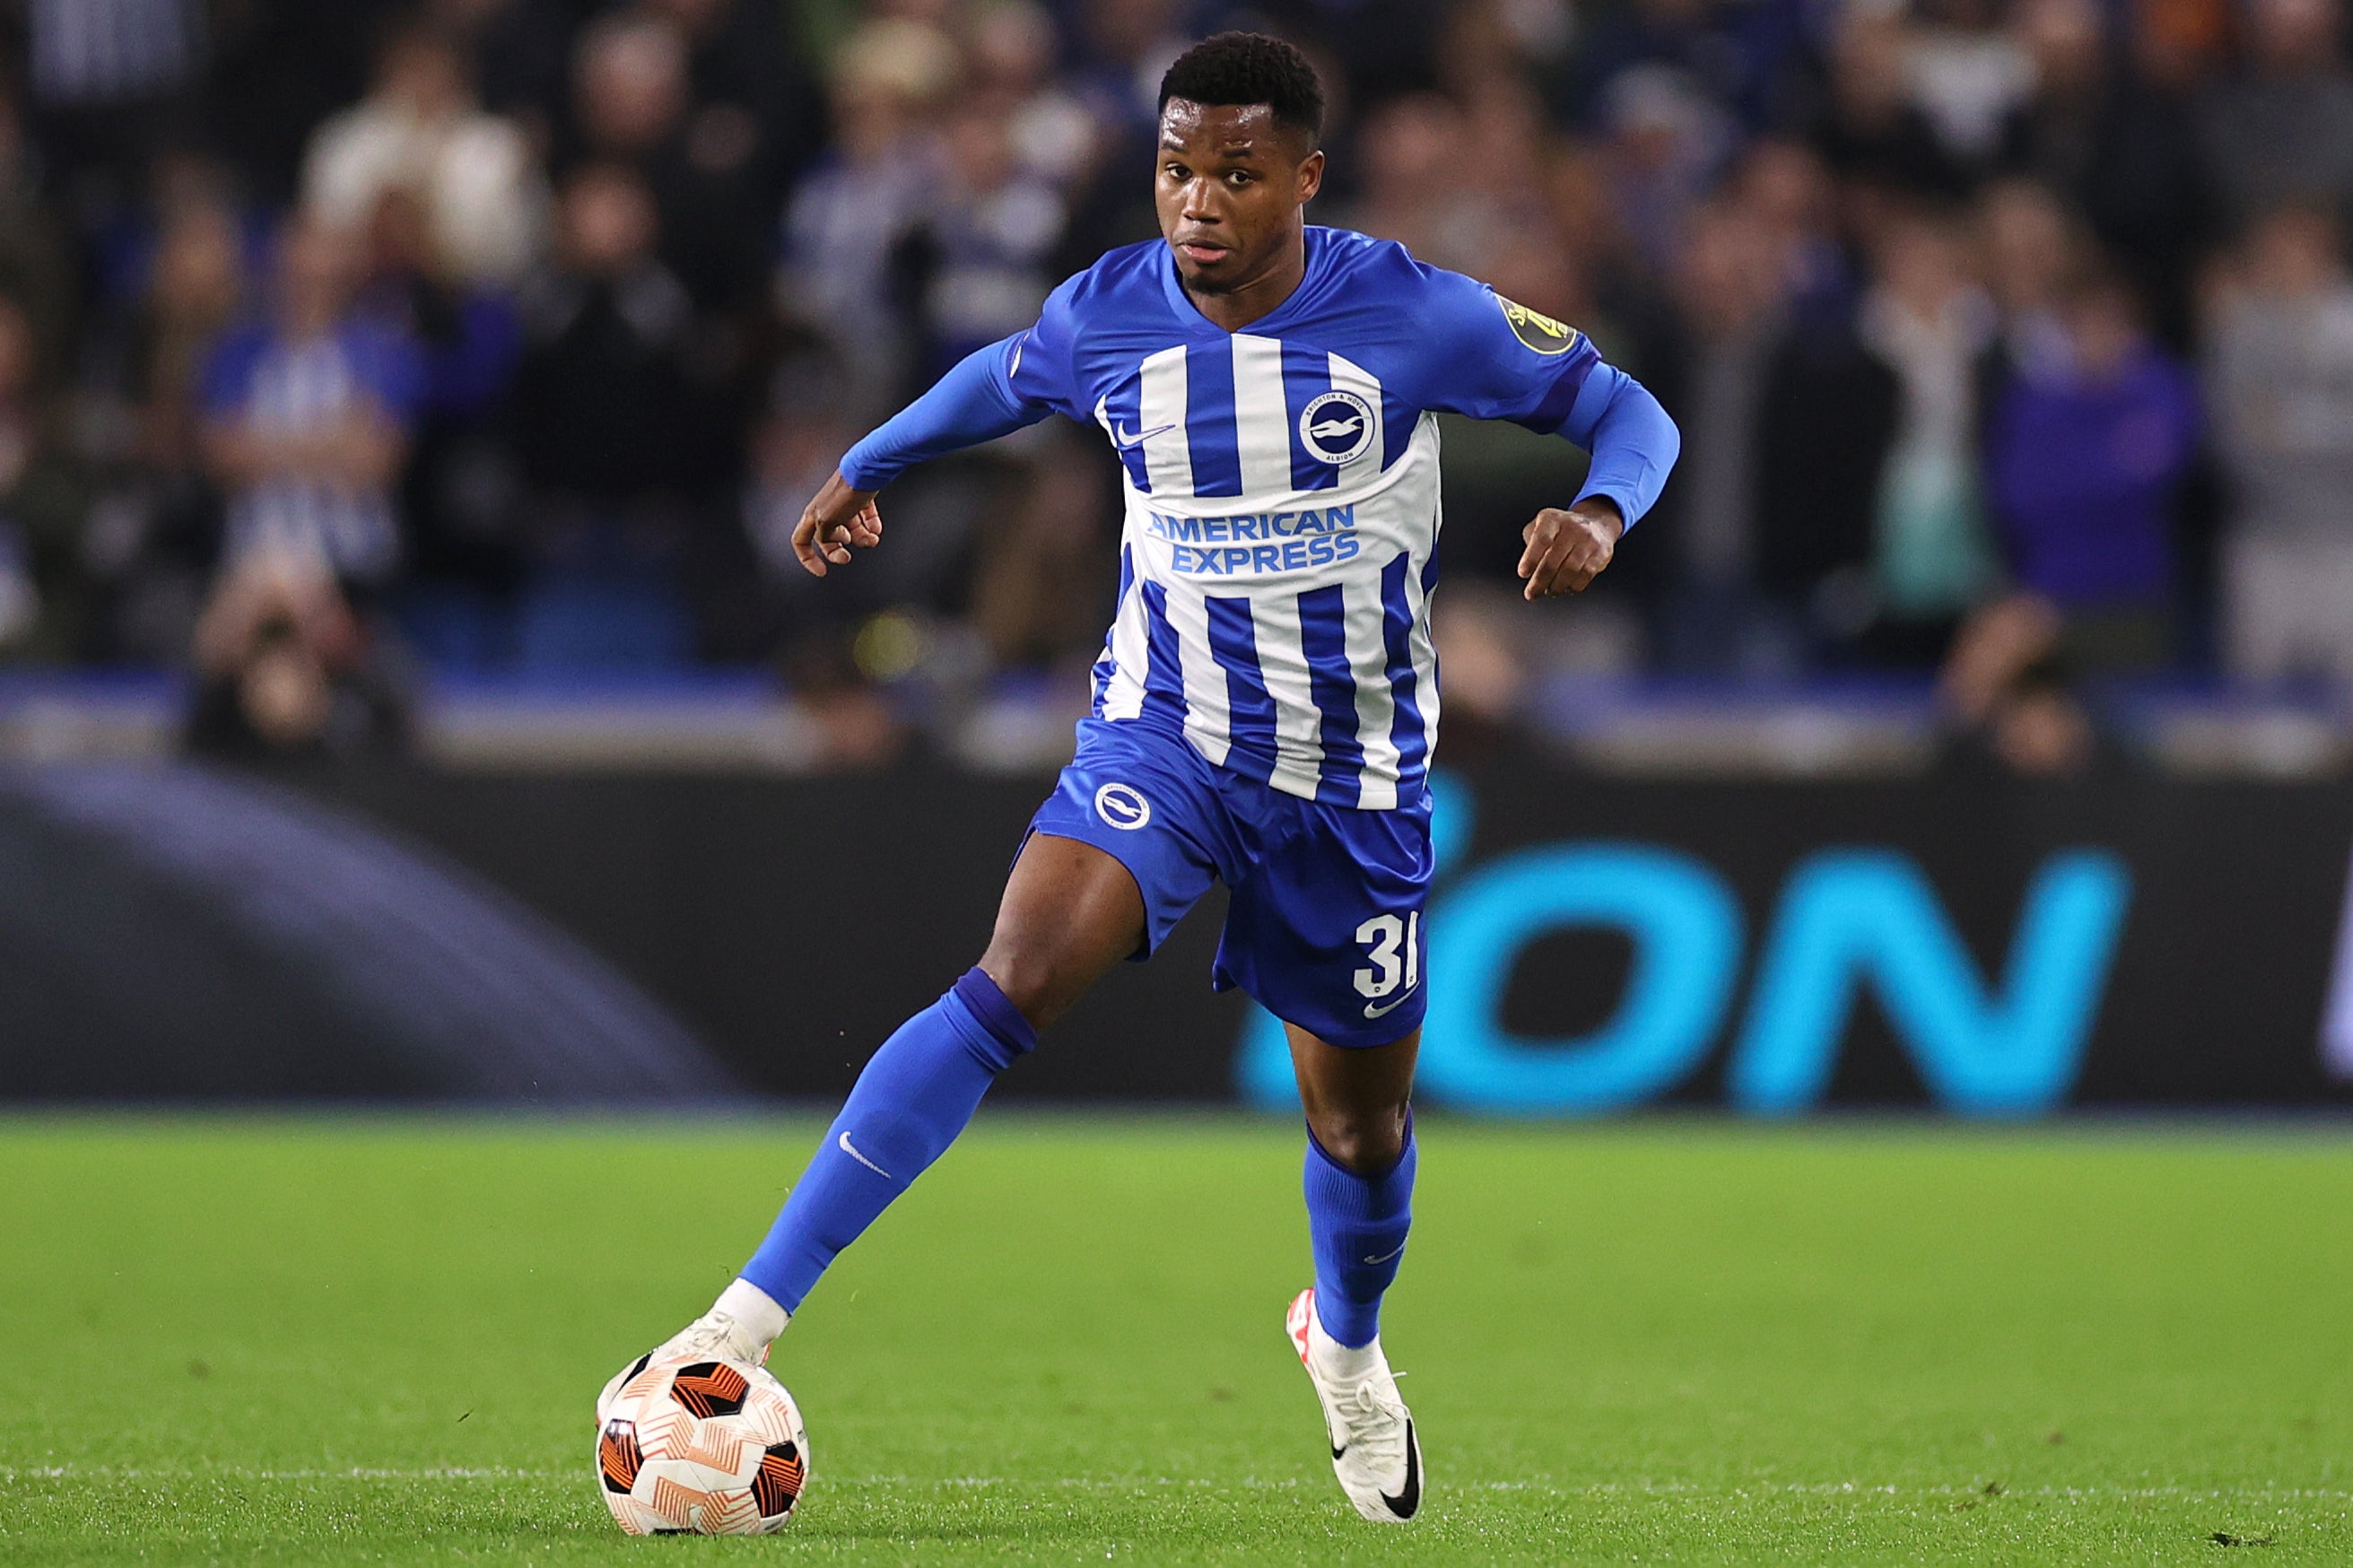 Ansu Fati joined Brighton from Barcelona this summer